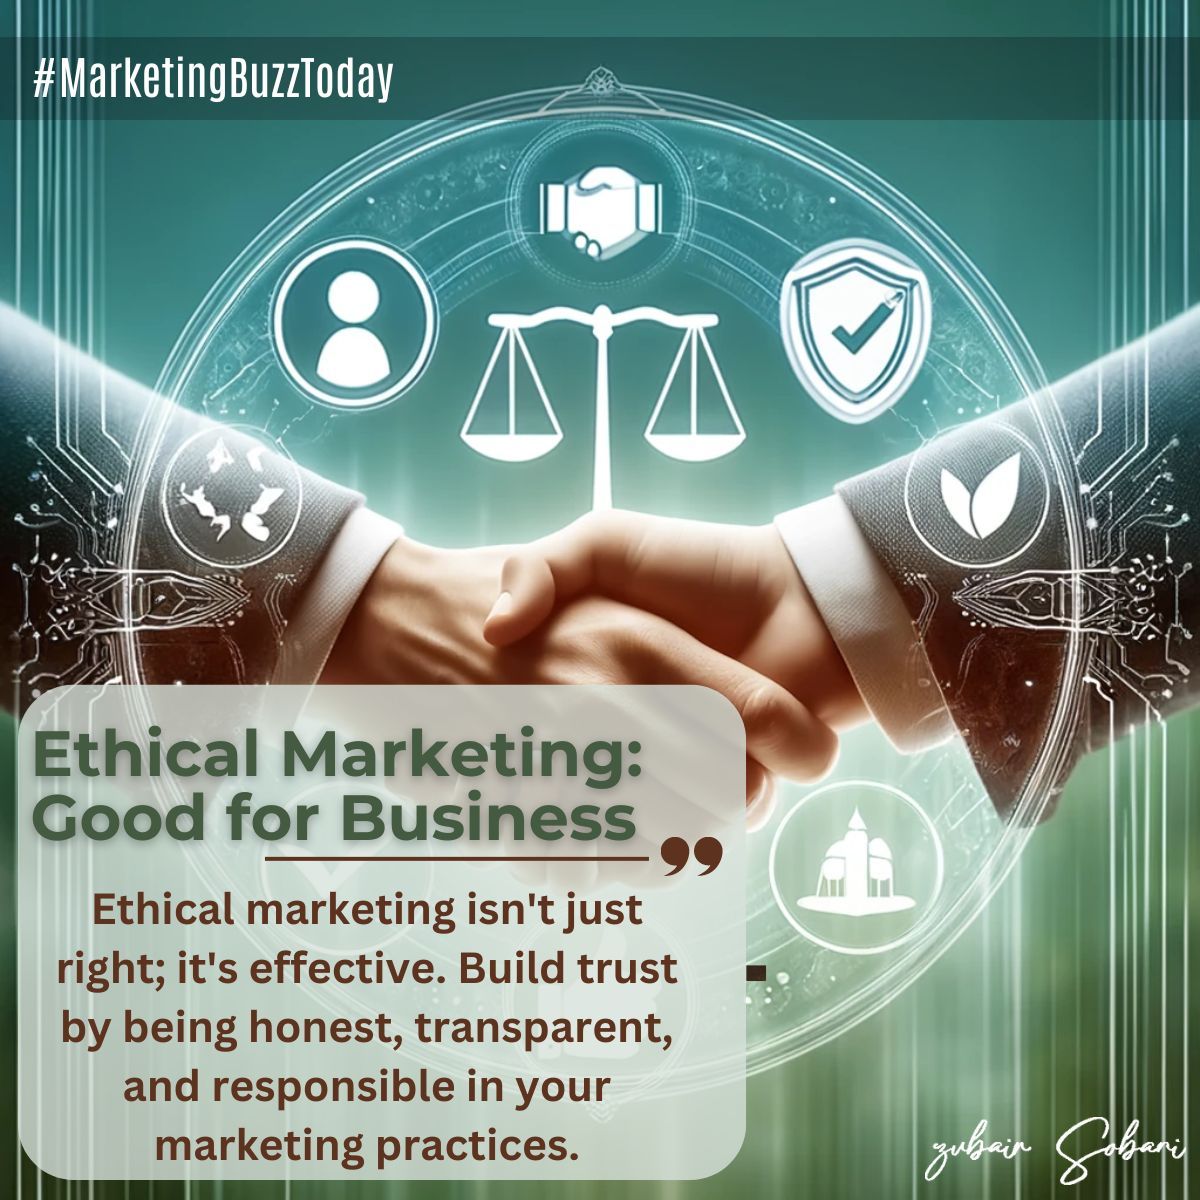 Post 23: Ethical Marketing: Good for Business
Ethical marketing isn't just right; it's effective. Build trust by being honest, transparent, and responsible in your marketing practices. 

#EthicalMarketing #TrustBuilding #ZubairSobani #Thinkventures #Thinkdirect #Canada #USA #KSA